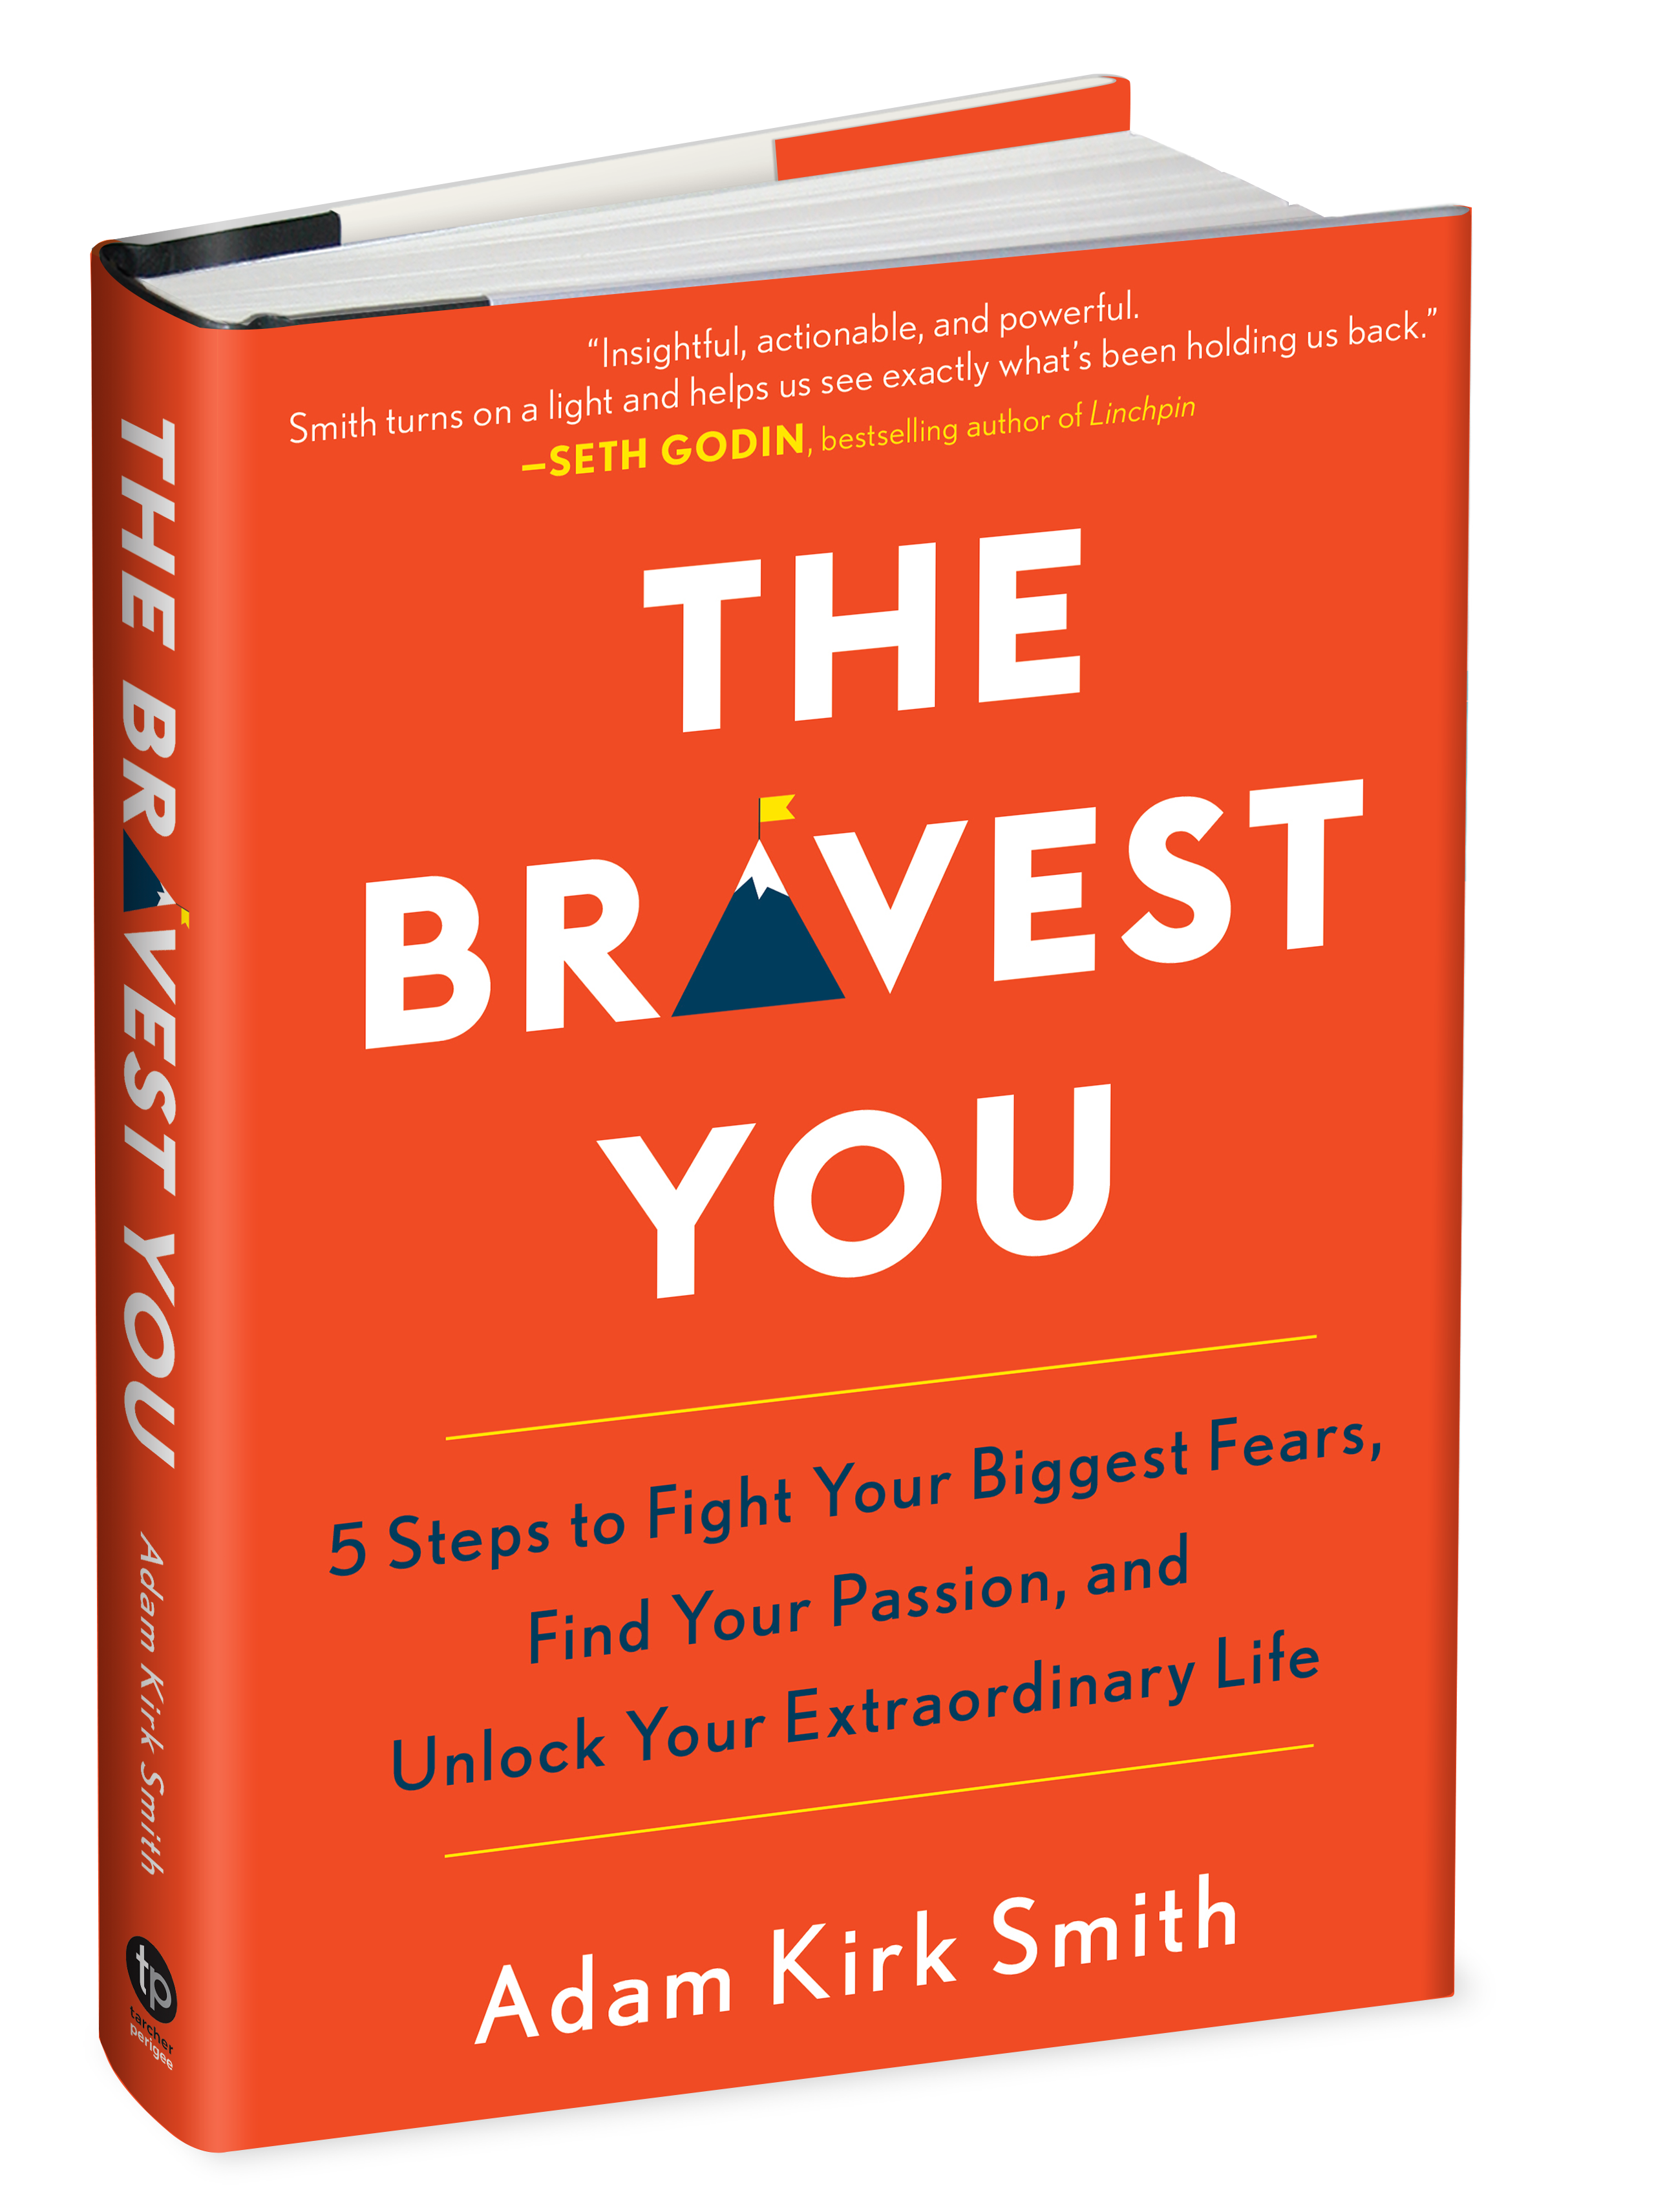 The Bravest You by Adam Kirk Smith